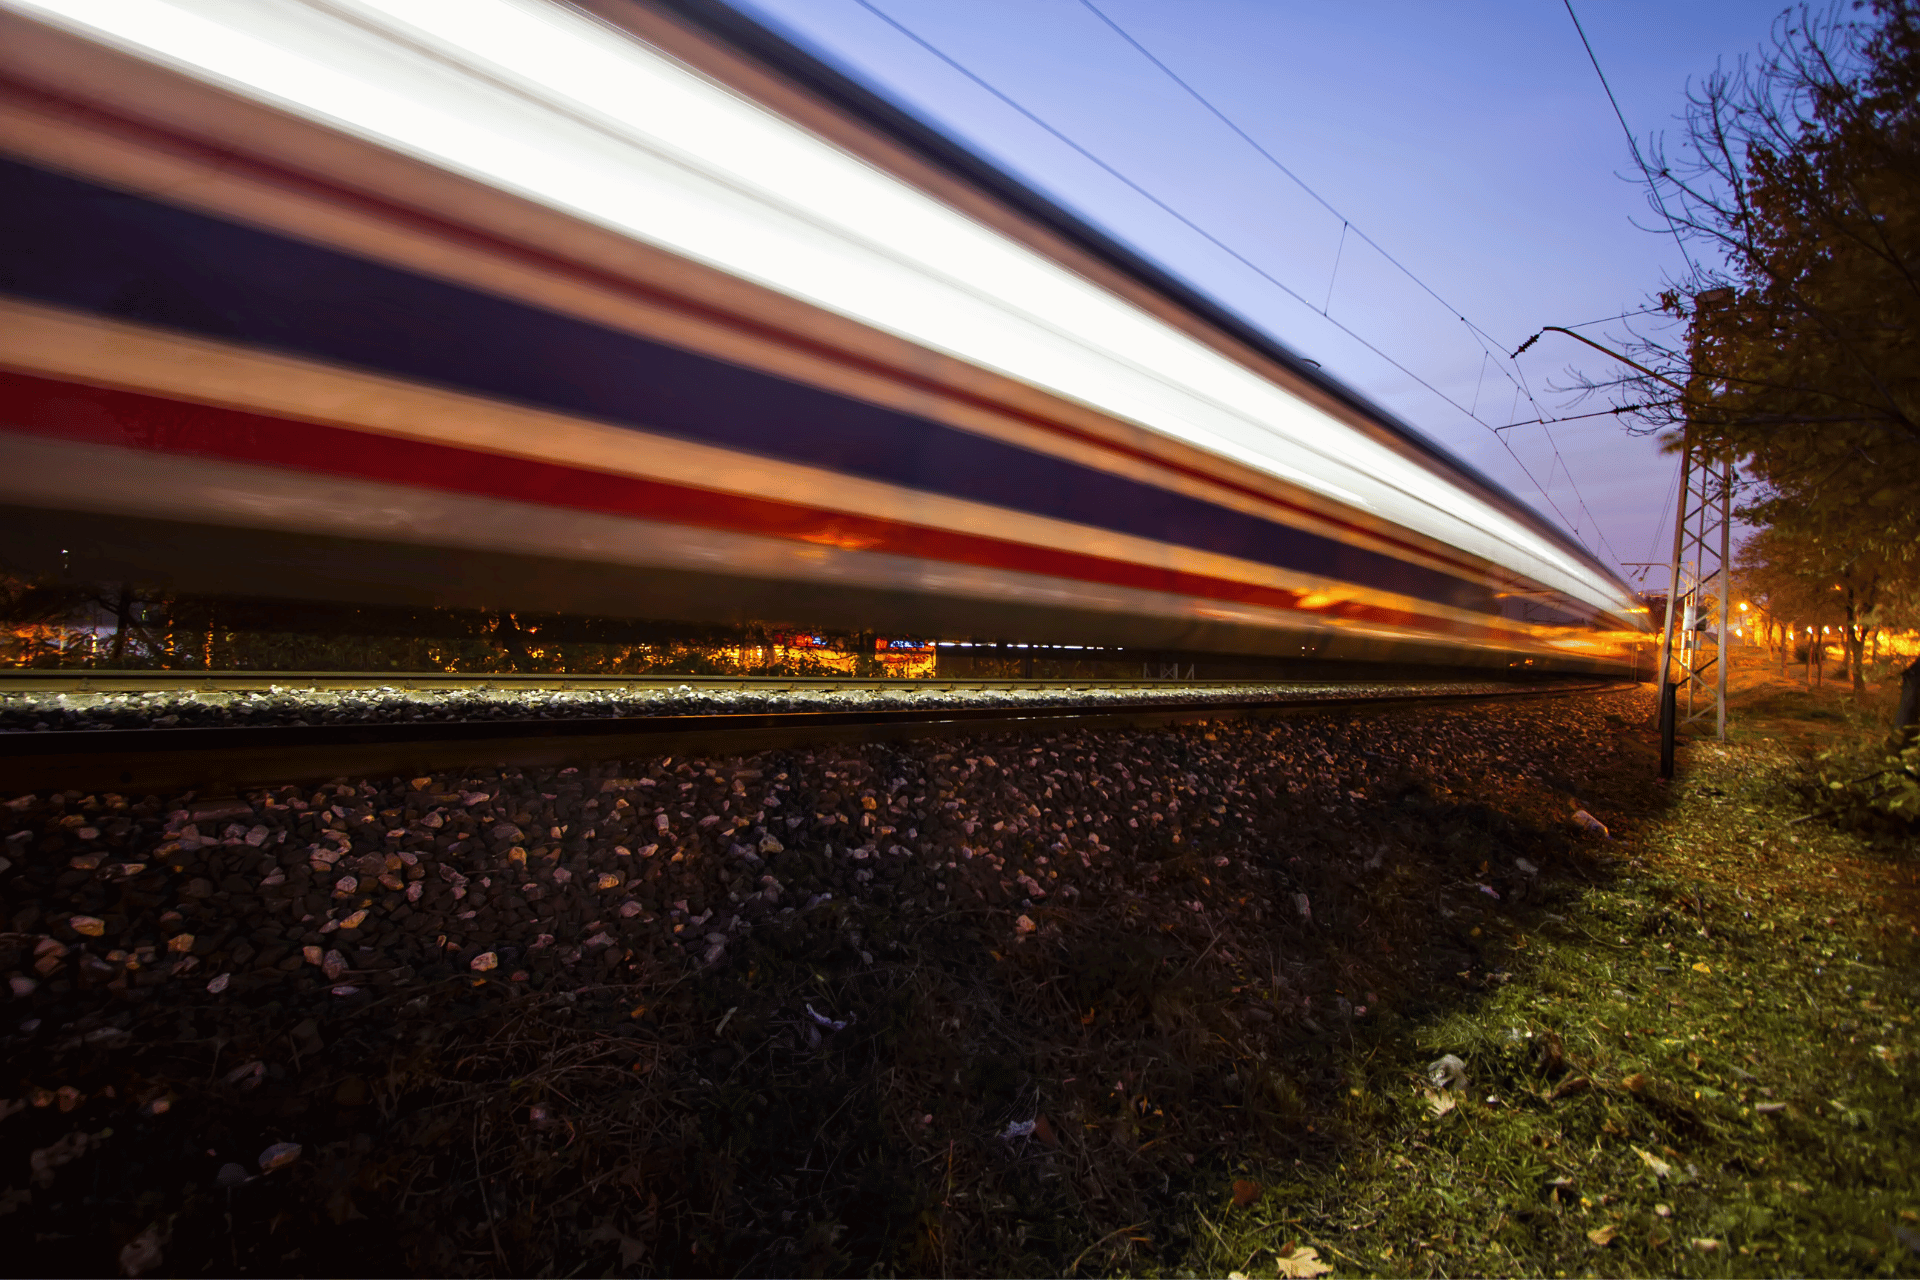 A train going fast